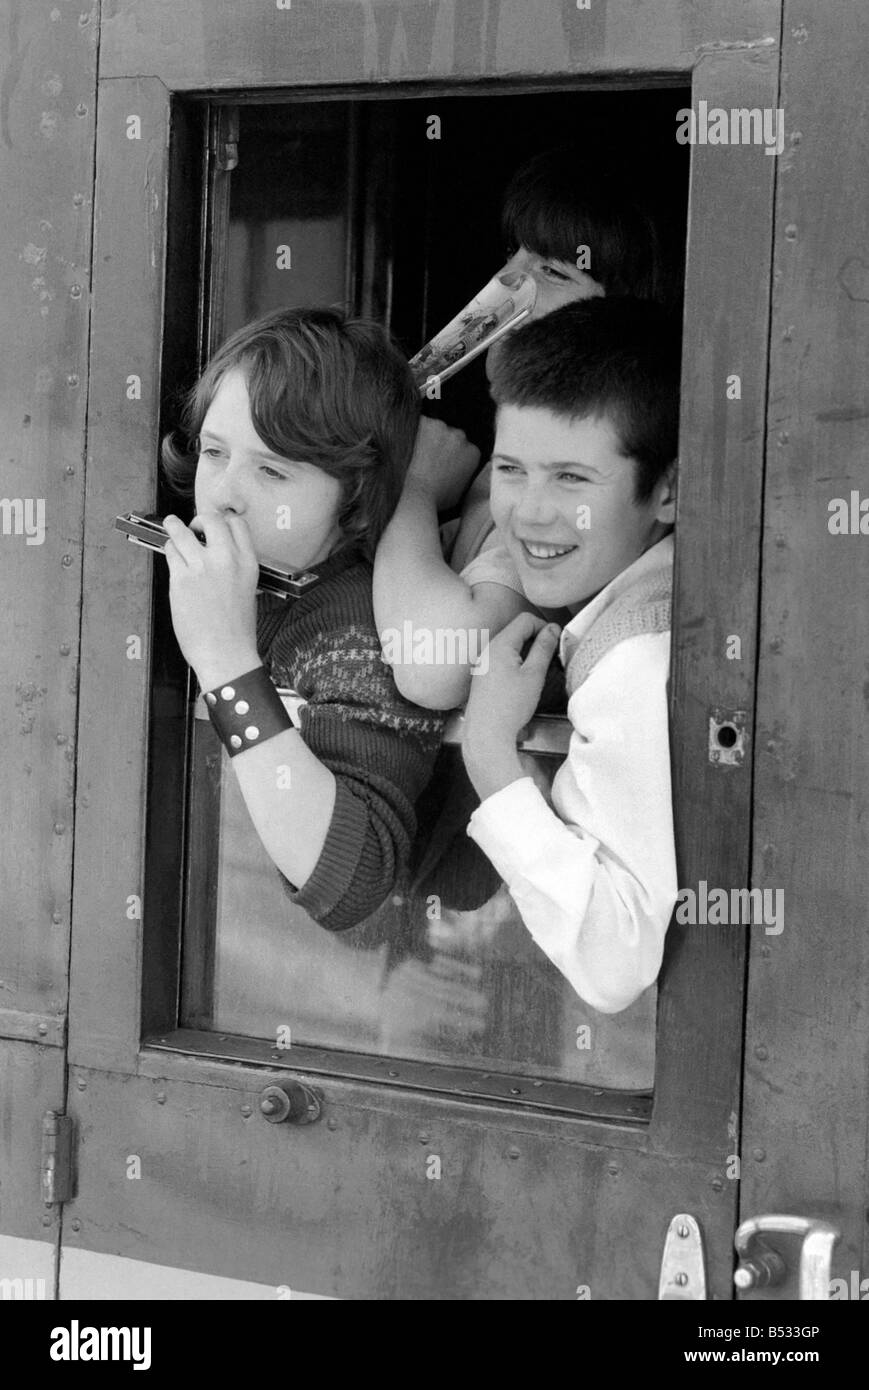 George Phillips, staff. Northern Ireland July 1972. Children waiting for the train in Belfast as families flee from the bombs and bullets. July 1972. July 1972 72-7262-006 Stock Photo